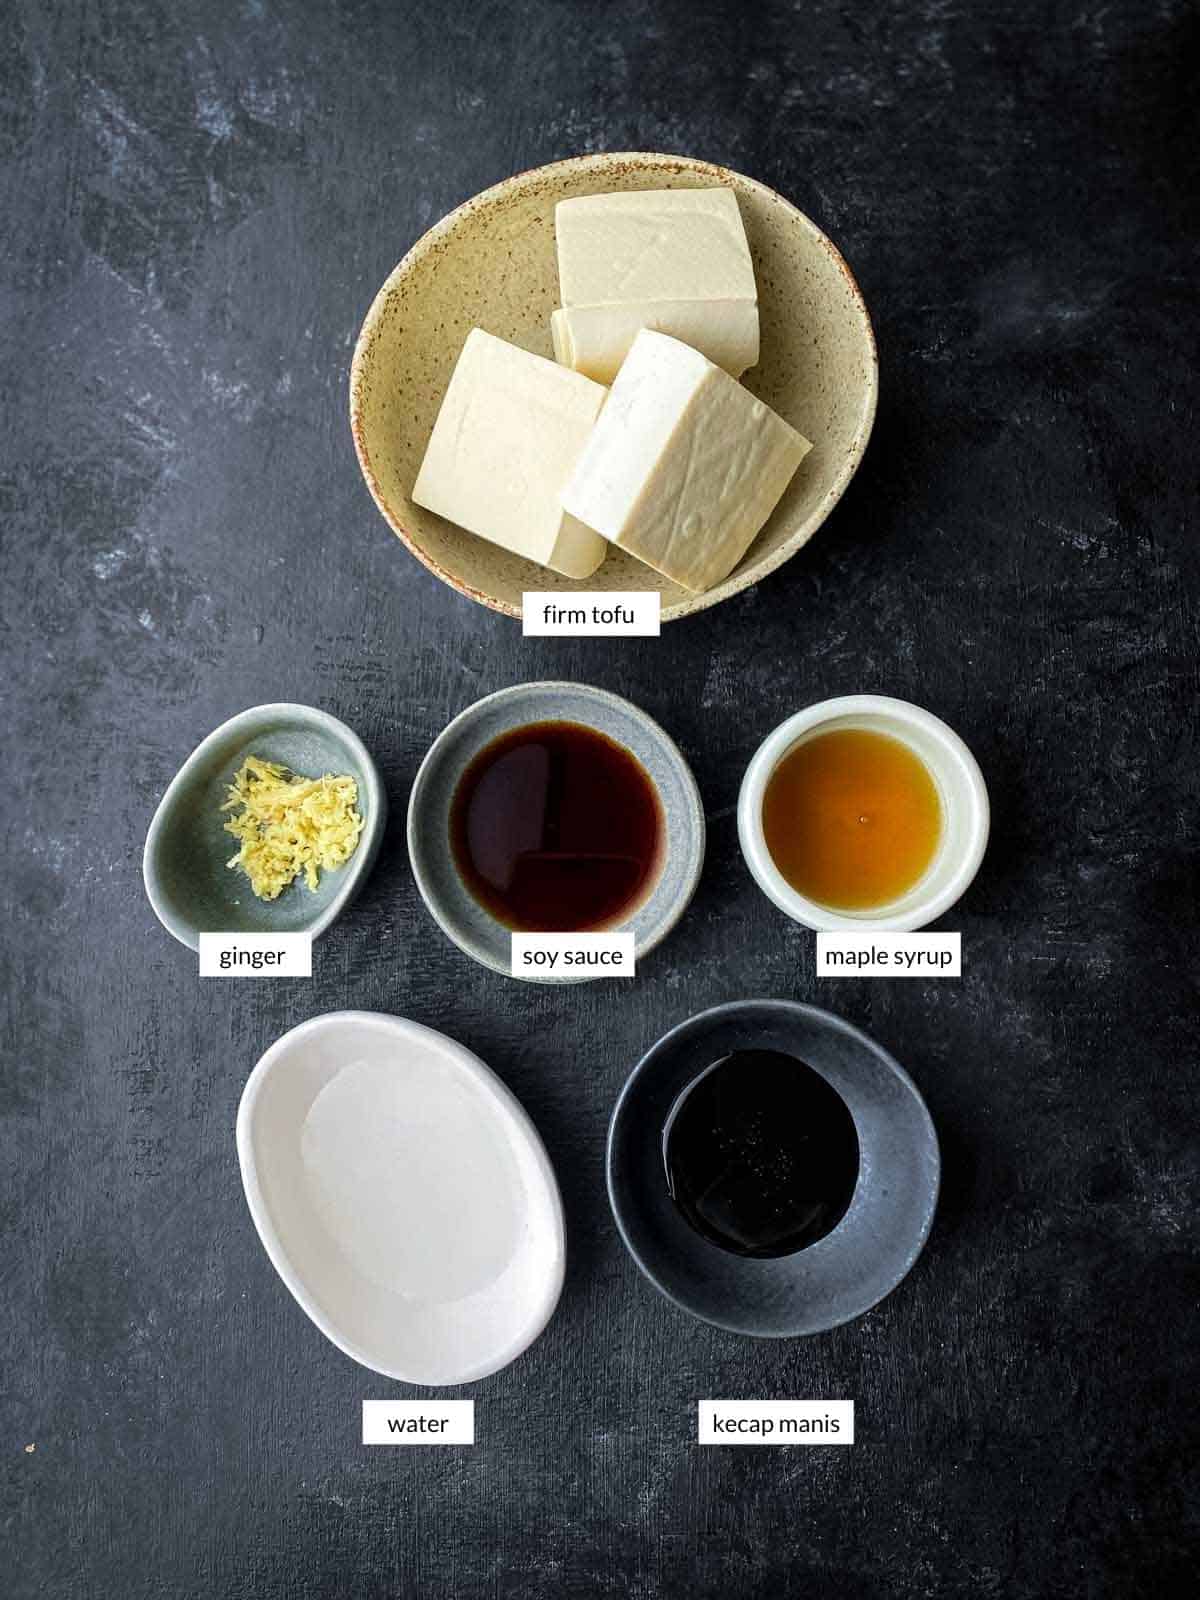 Individually labelled ingredients for sticky tofu